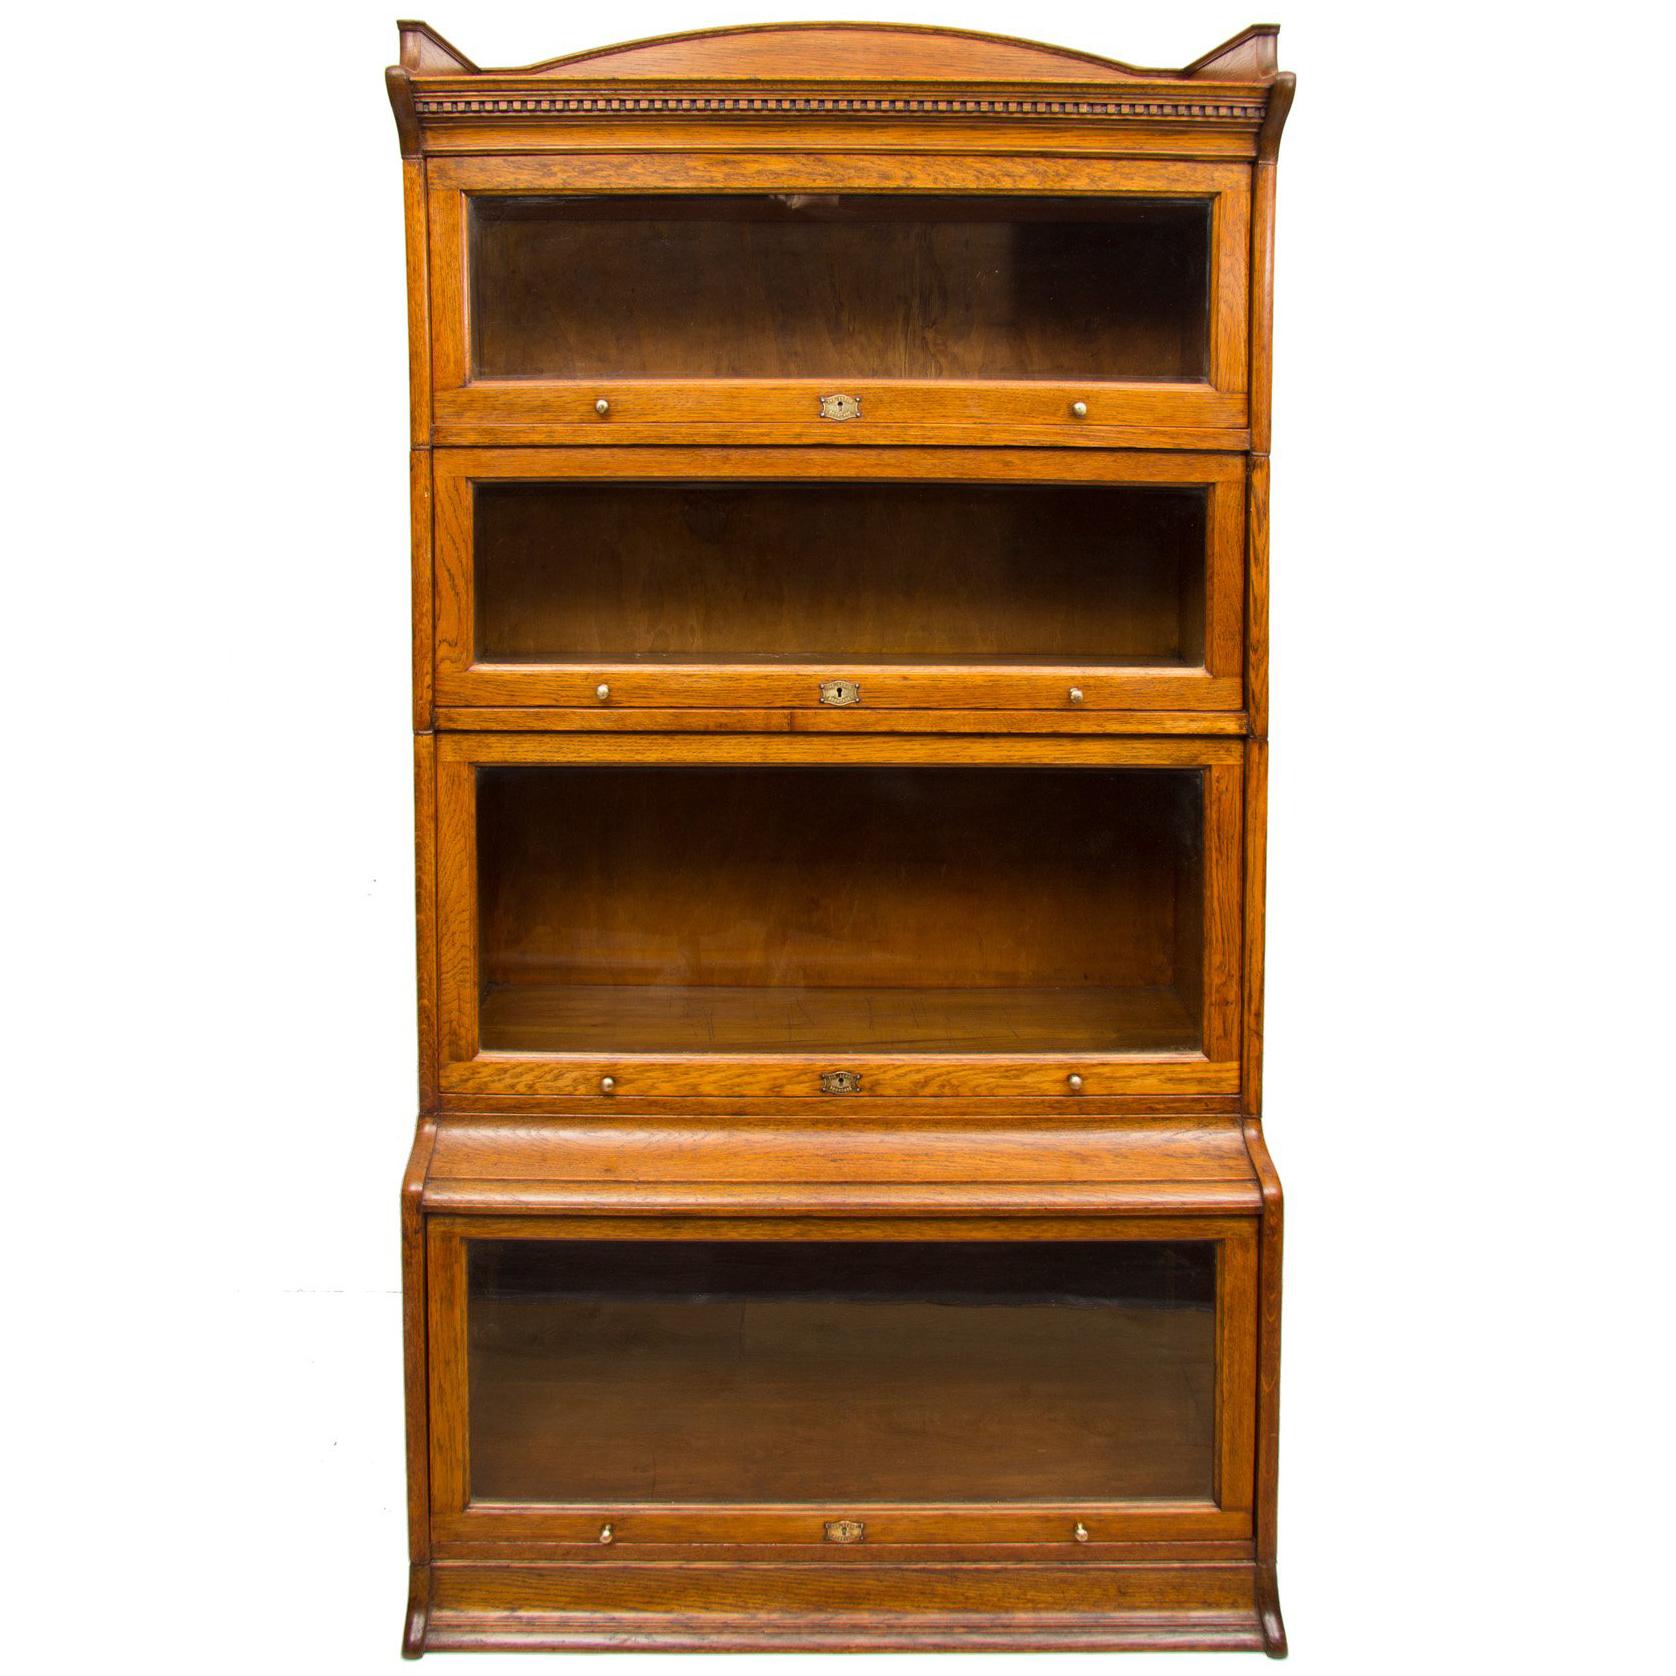 1920s-1930s Oak Stacking Bookcase by Harris Lebus